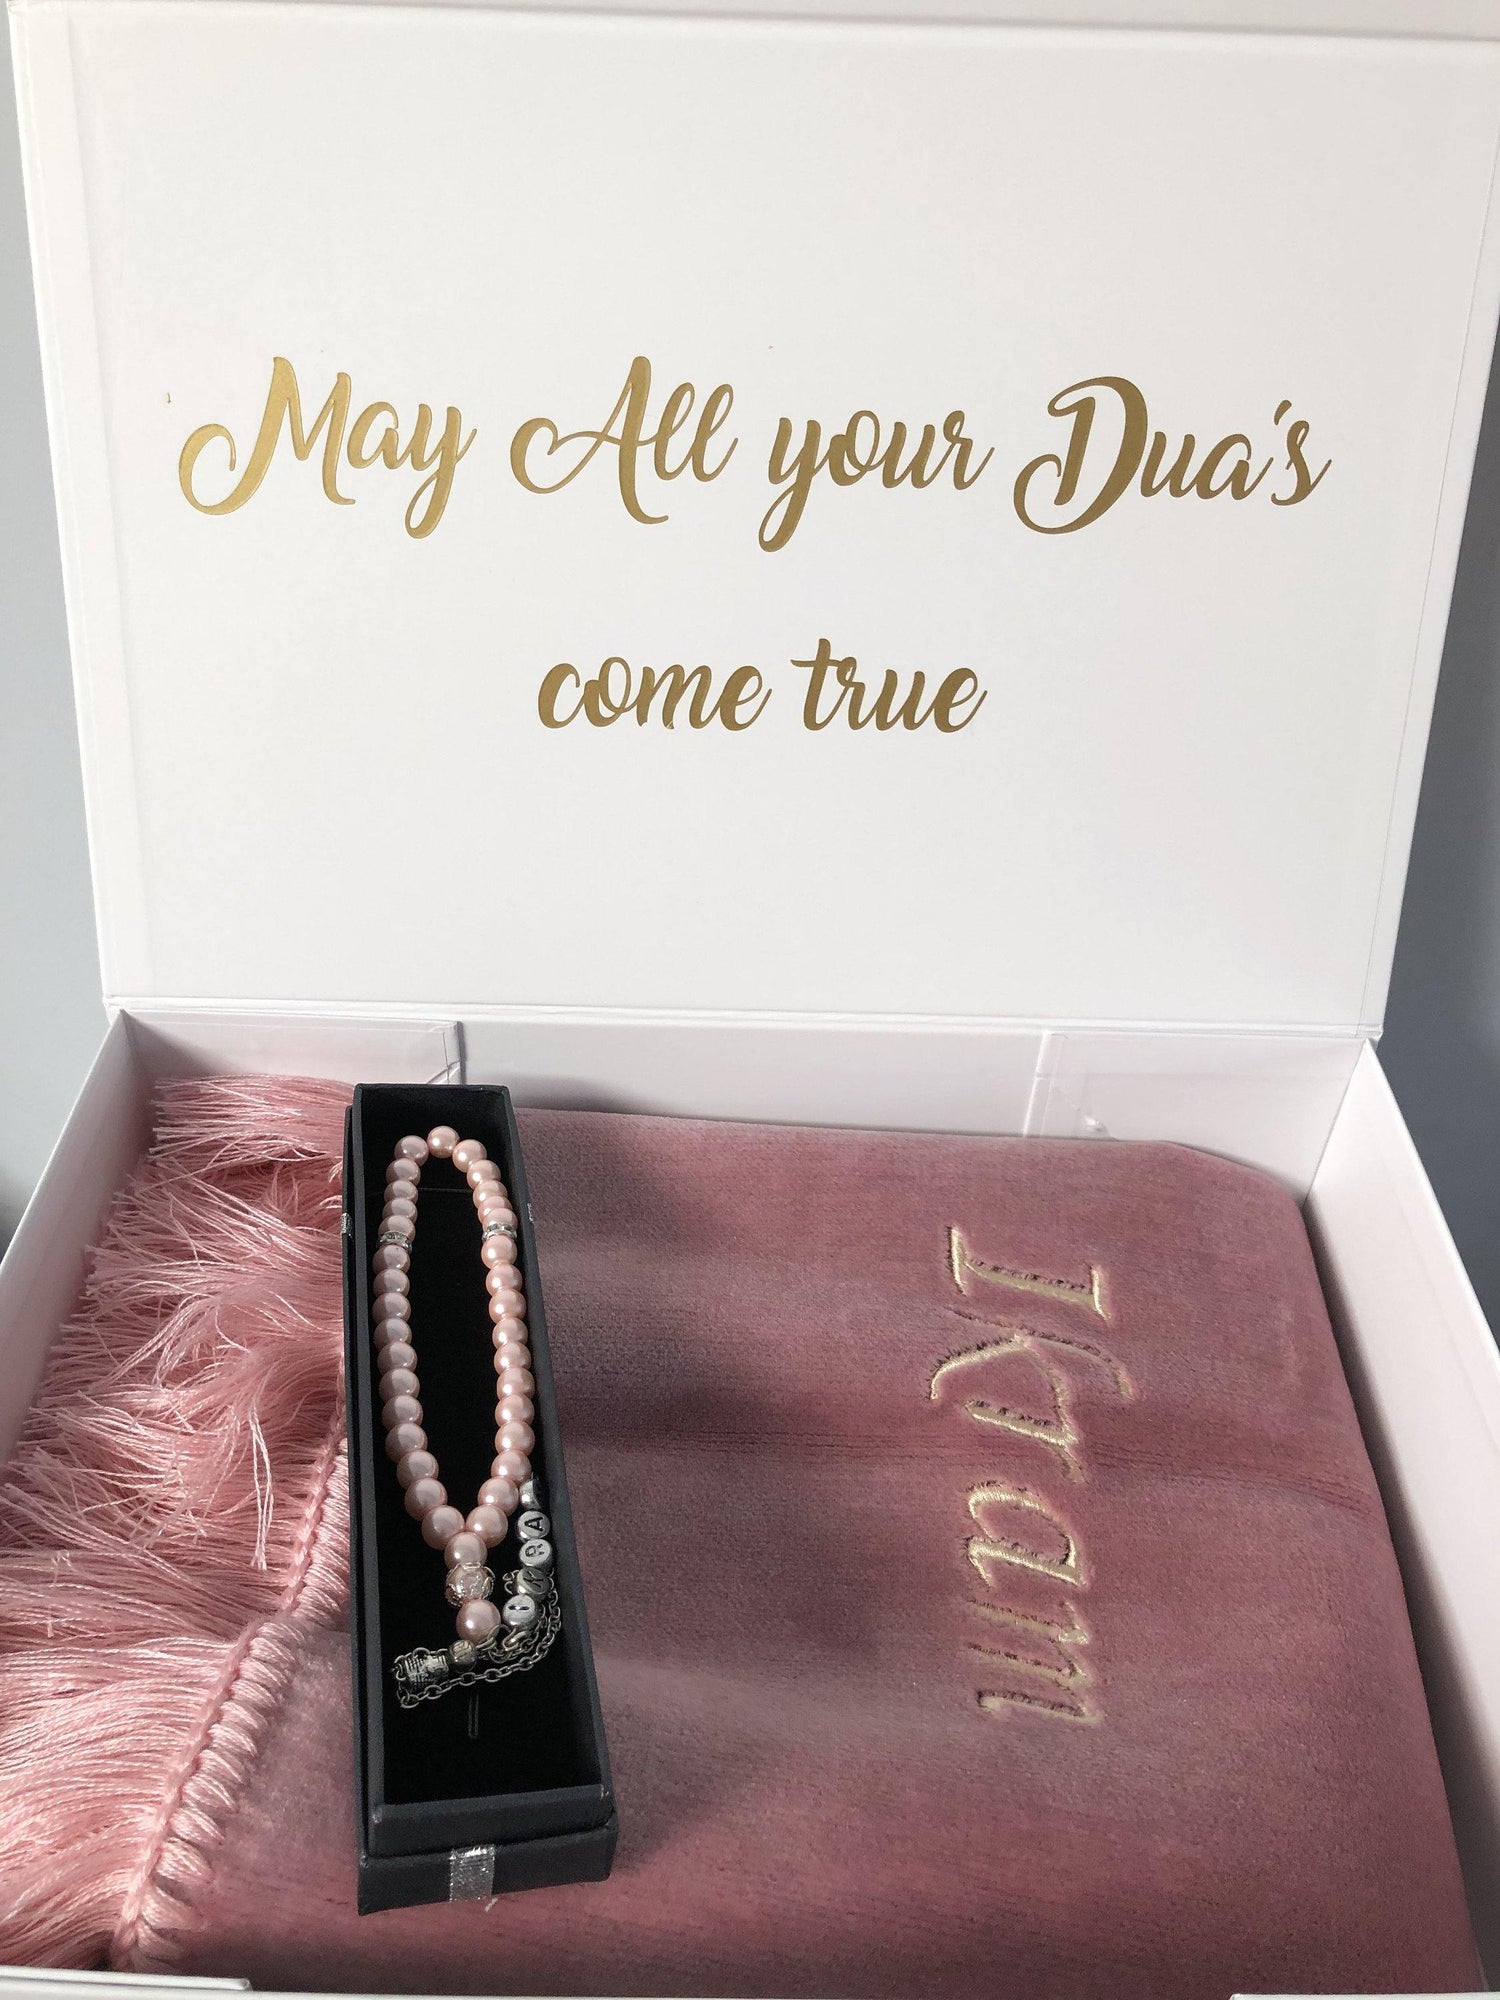 Personalised gift box (Rug - Tasbih) - Unique Tasbihs & Gifts